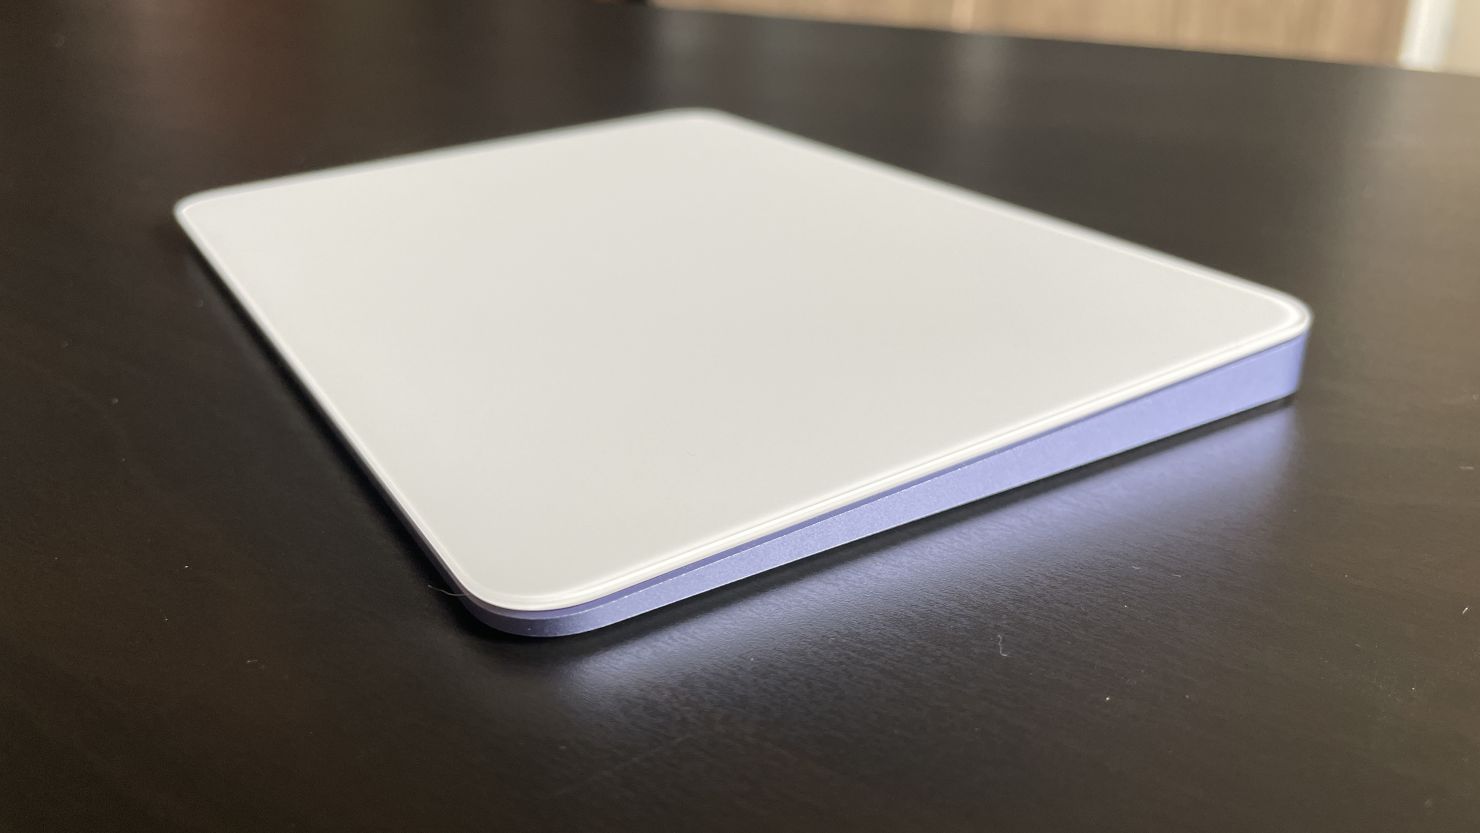 How To Connect A Mouse Pad On A MacBook